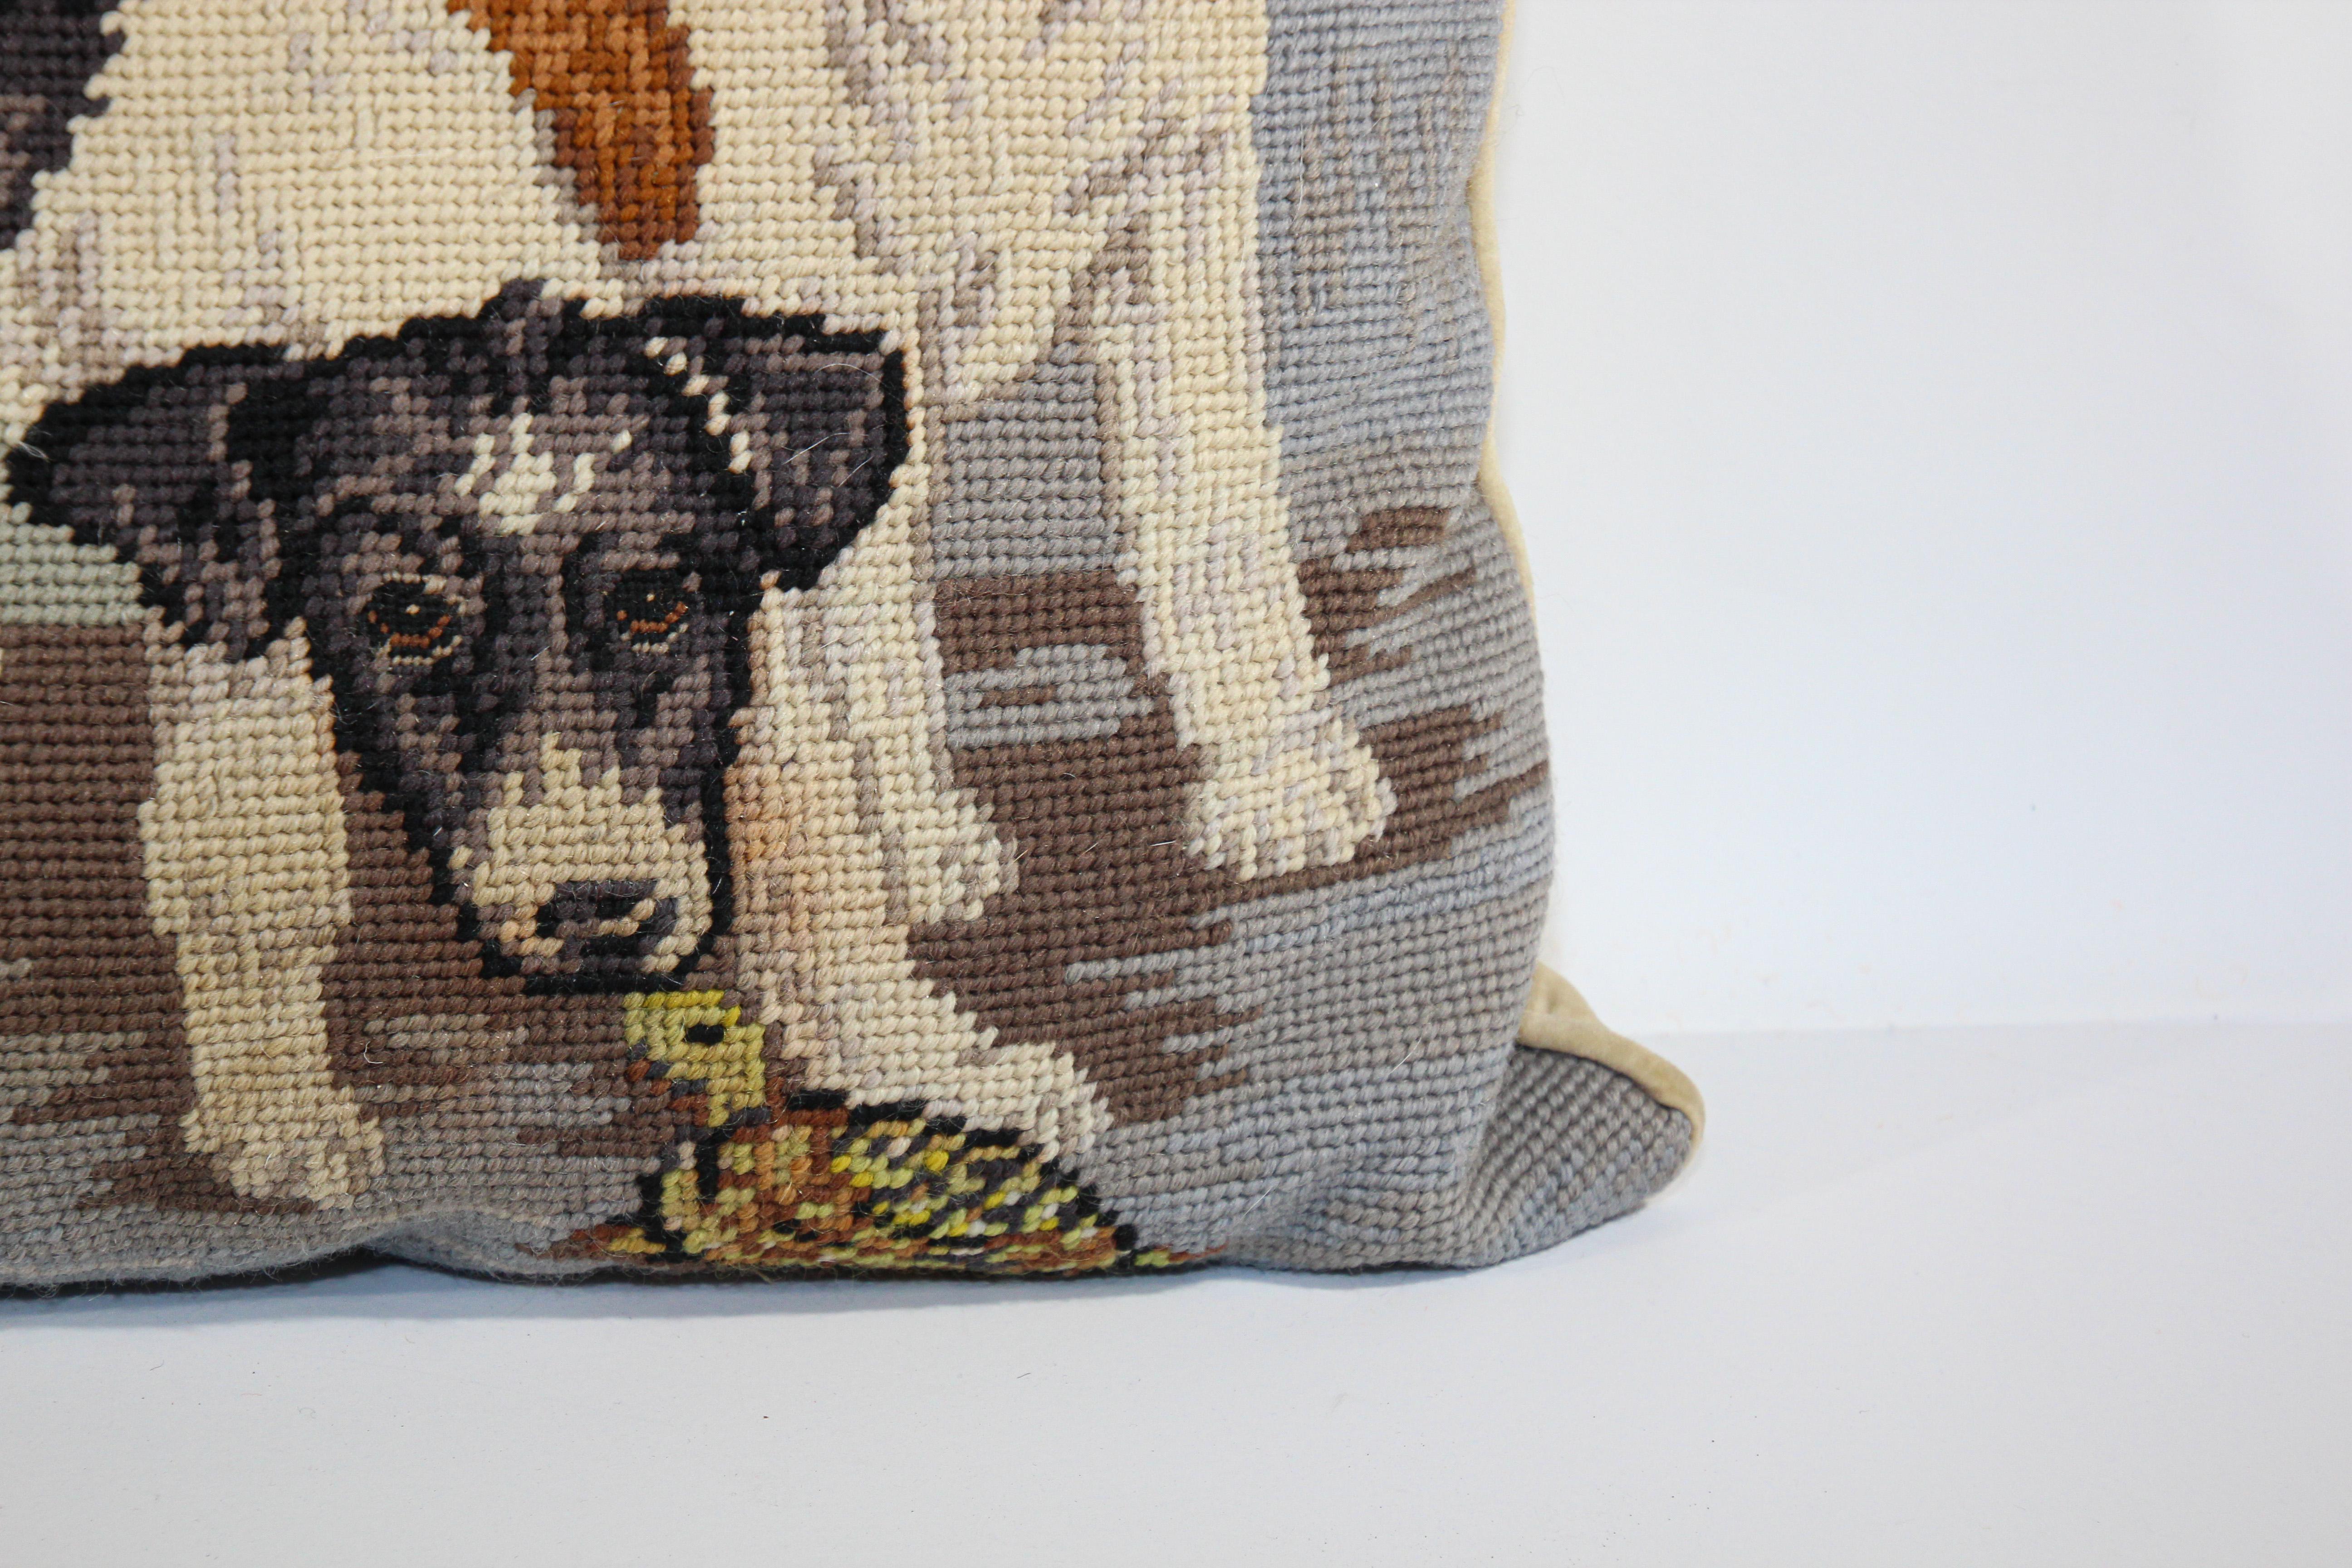 American Vintage Throw Decorative Needlepoint Dogs Pillow